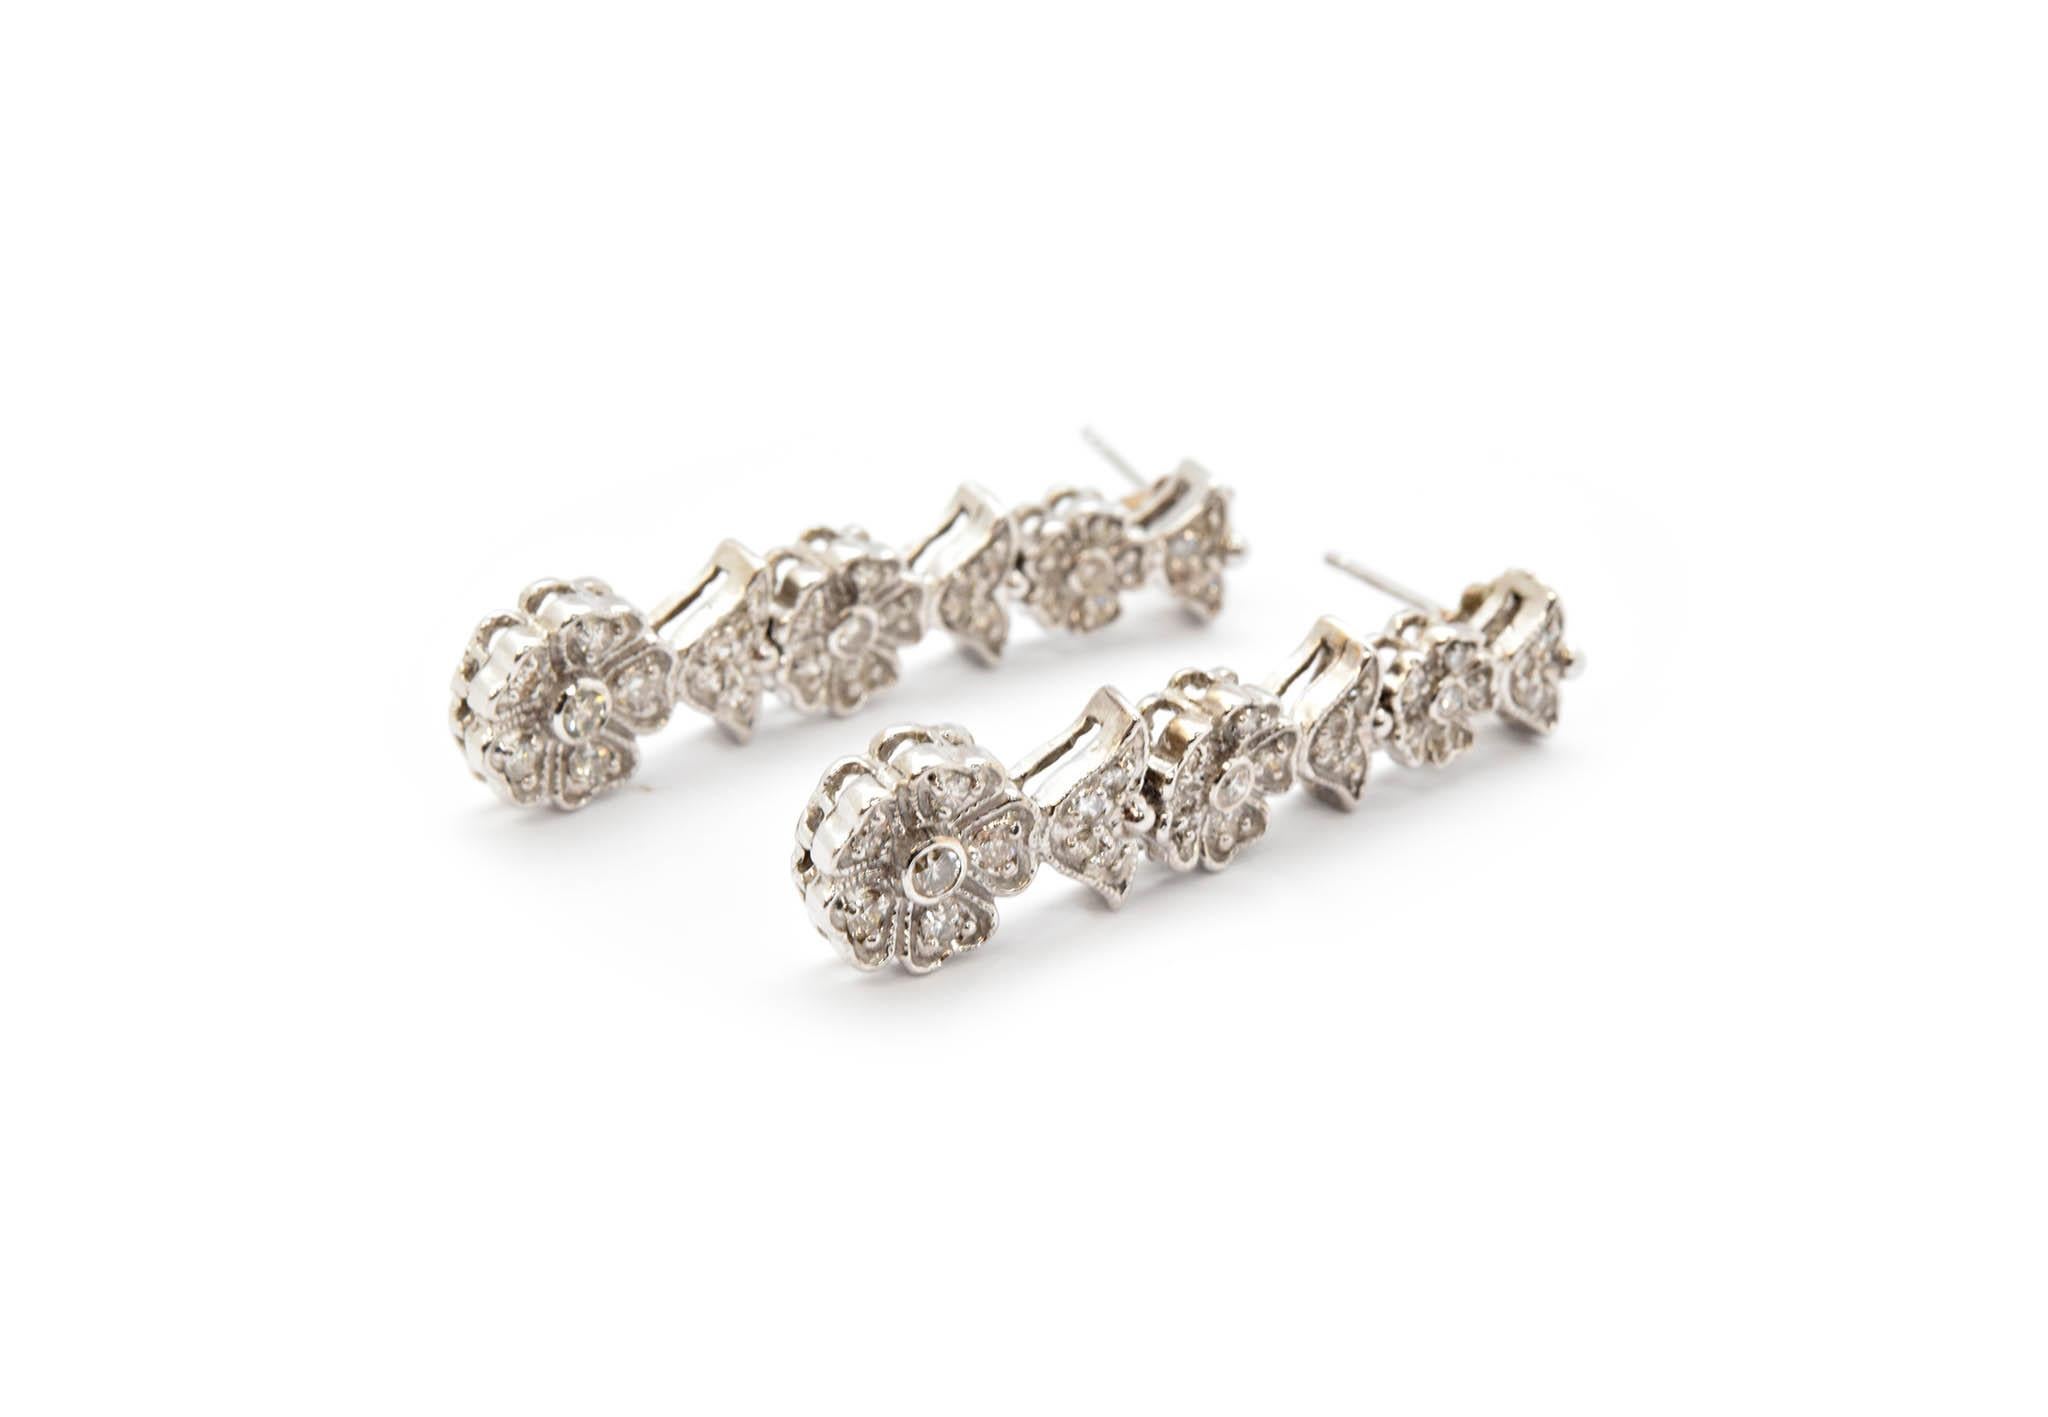 This pair of earrings is made in 14k white gold. It features a flower motif with each part of the flower set with round diamonds. The diamonds have a total weight of 1.28 carats, and the stones are graded G-H in color and SI in clarity. The earrings